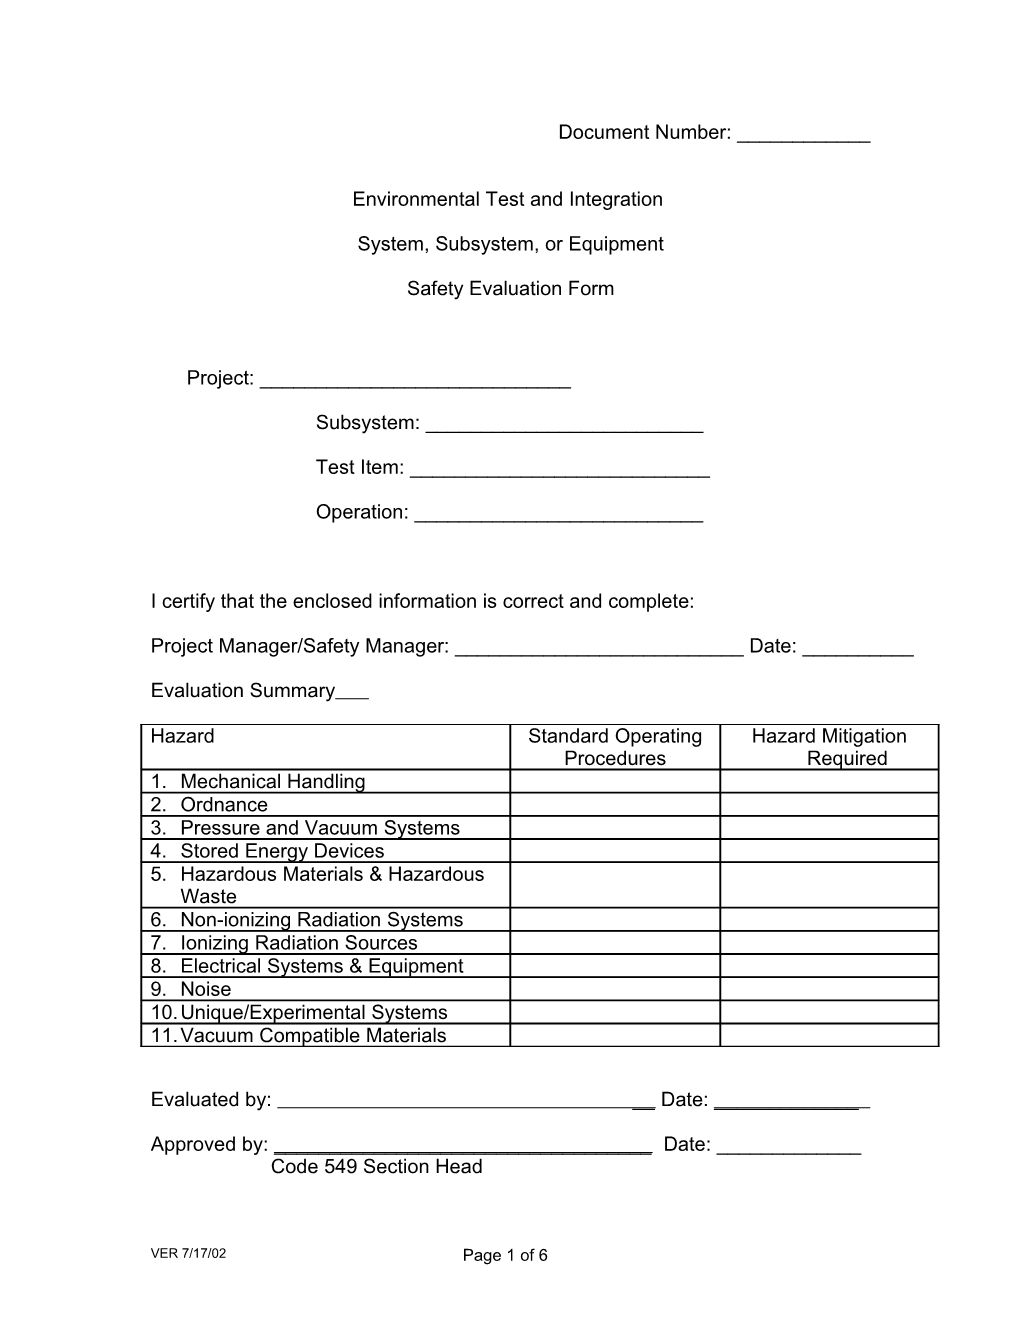 Code 750 Evaluation Form of Test Articles